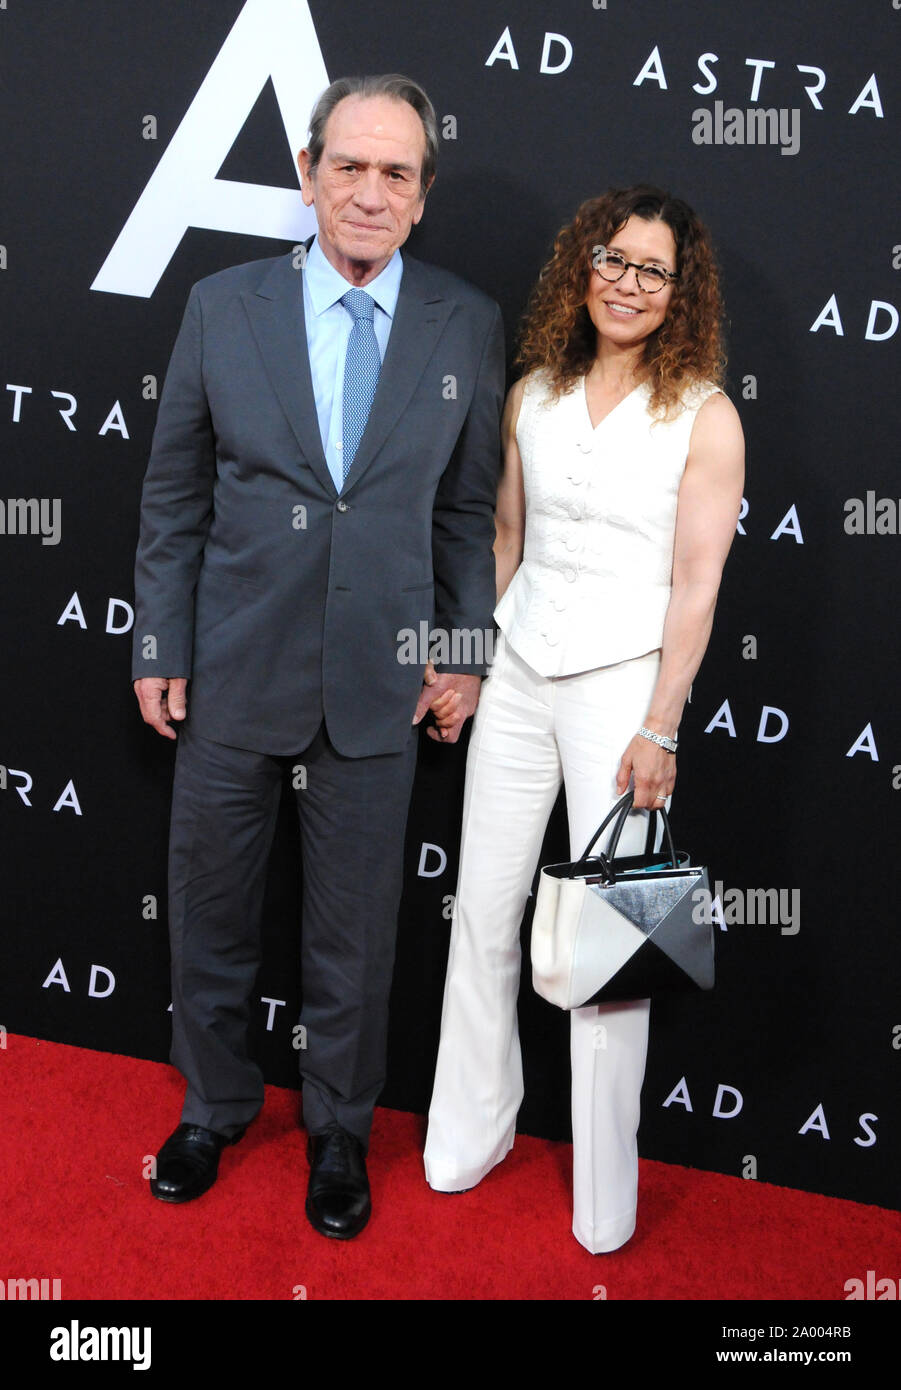 Hollywood, California, USA 18th September 2018 Actor Tommy Lee Jones and wife Dawn Laurel-Jones attend 20th Century Fox's 'Ad Astra' Special Screening on September 18, 2018 at Cinerama Dome in Hollywood, California, USA. Photo by Barry King/Alamy Live News Stock Photo